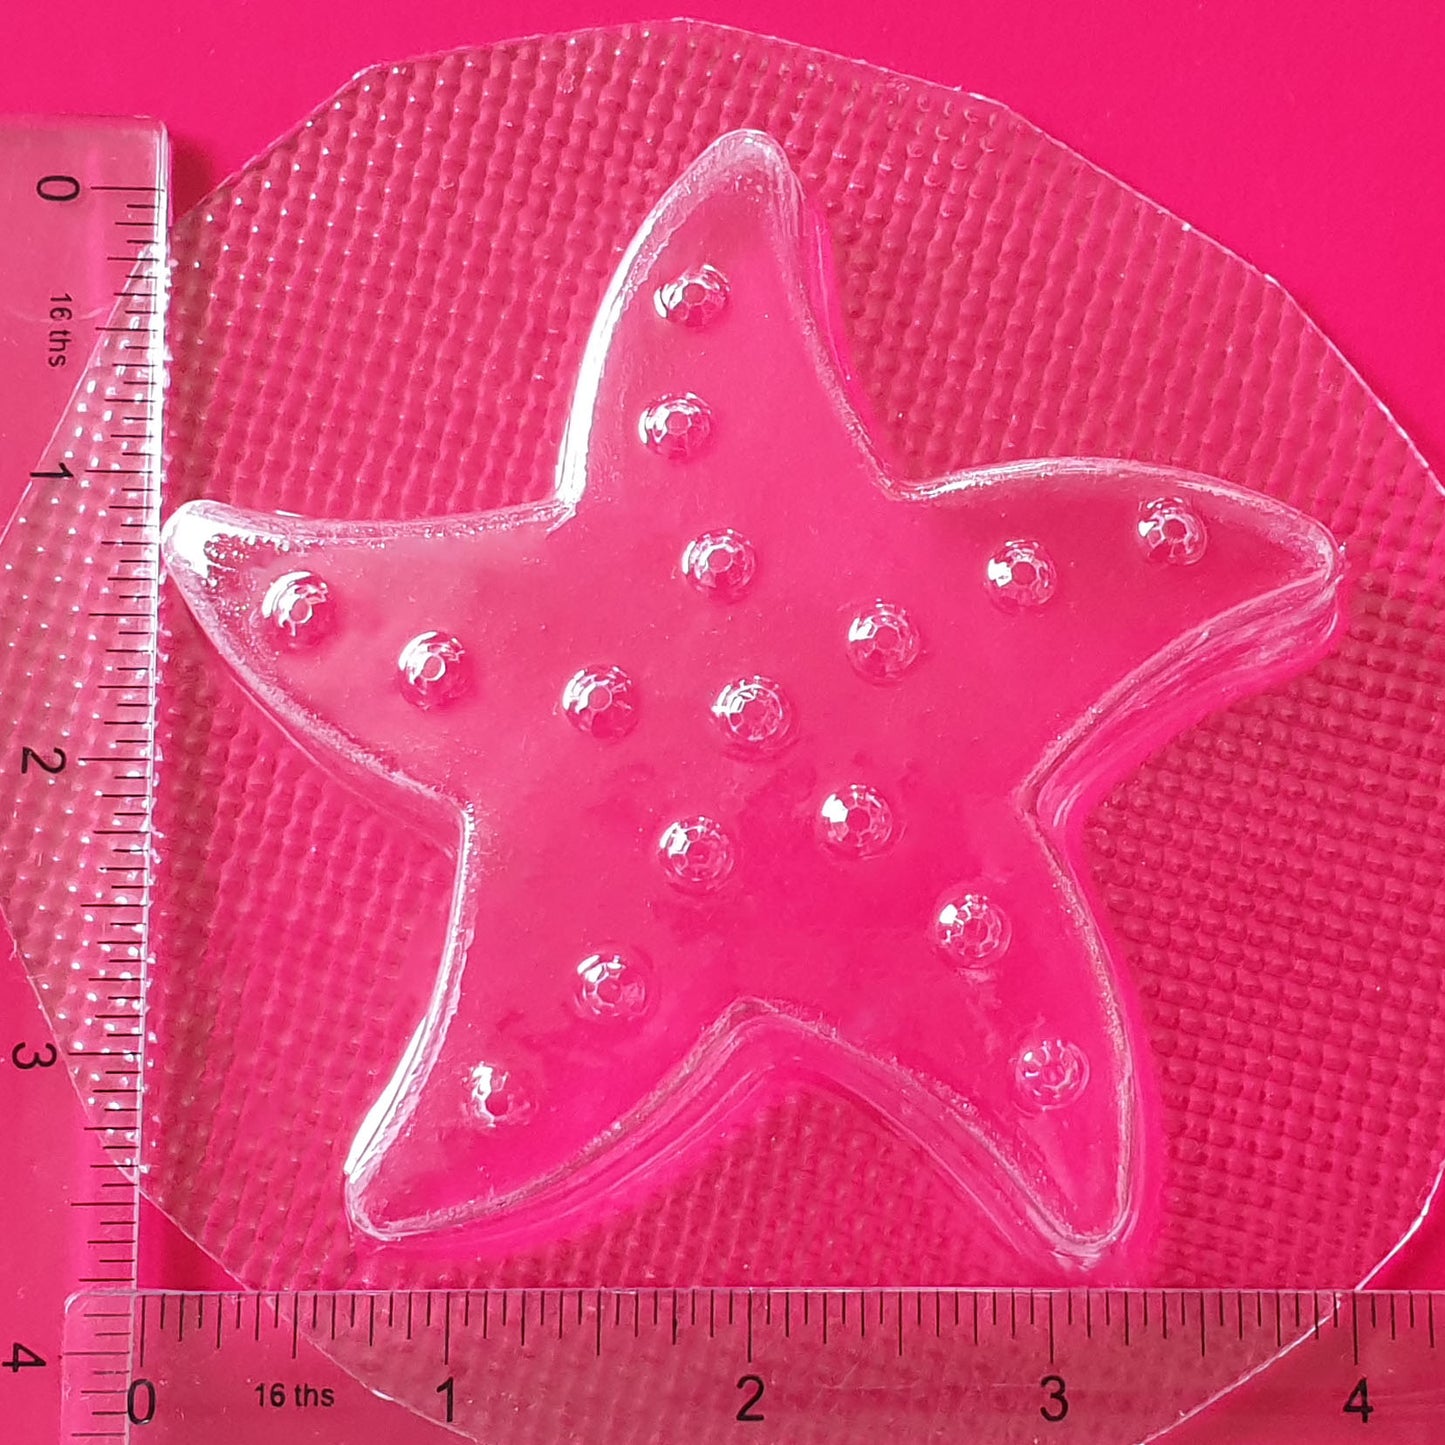 Starfish | Truly Personal | Bath Bomb, Soap, Resin, Chocolate, Jelly, Wax Melts Mold